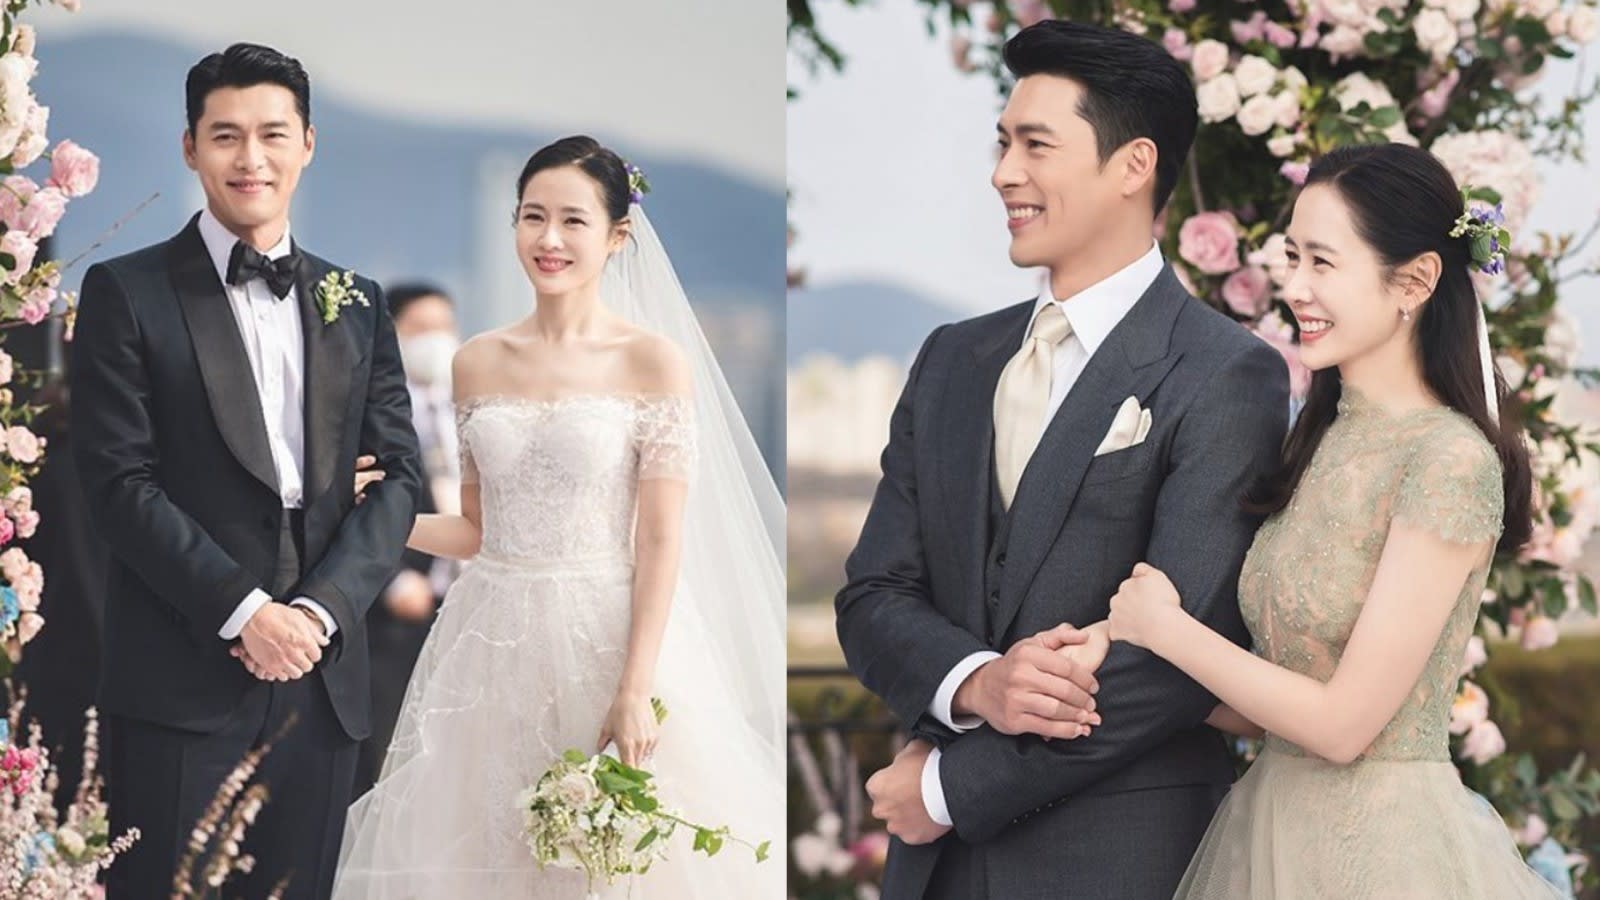 Son Ye Jin Will Reportedly Move Into Hyun Bin's S$5.4mil Penthouse After  They Get Married Next Month - 8days